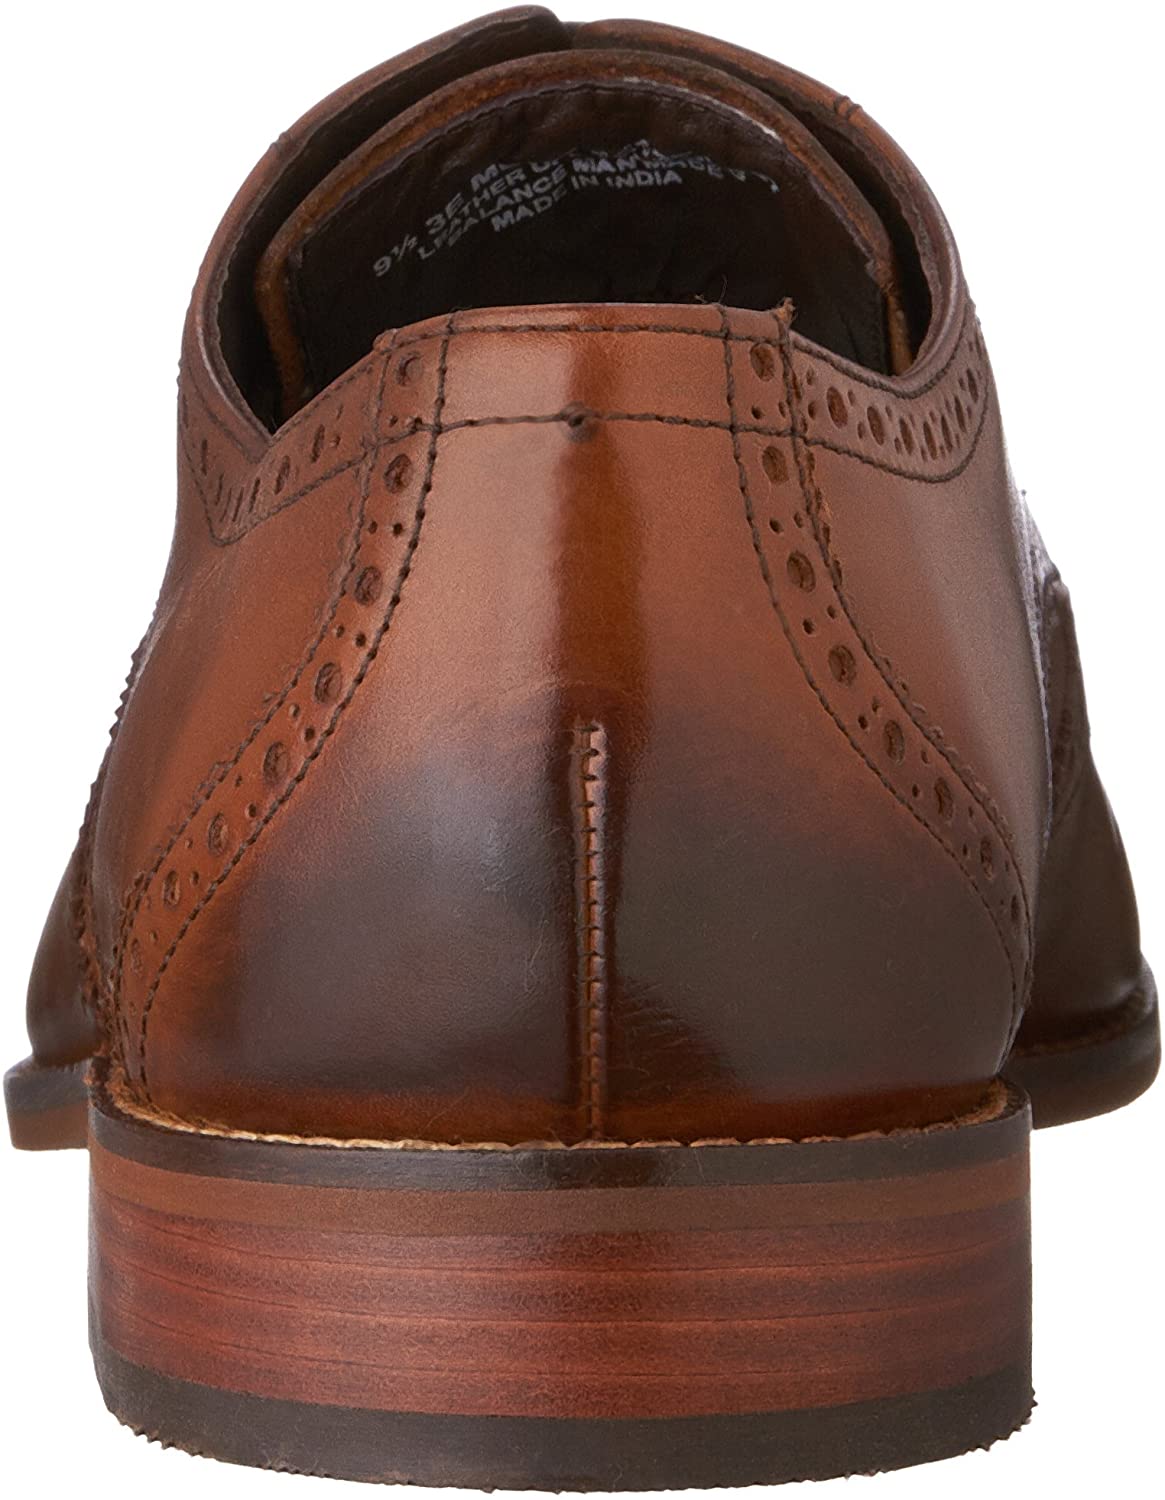 Mens Castellano Wing Leather Wing Tip Derby Shoes - image 3 of 8